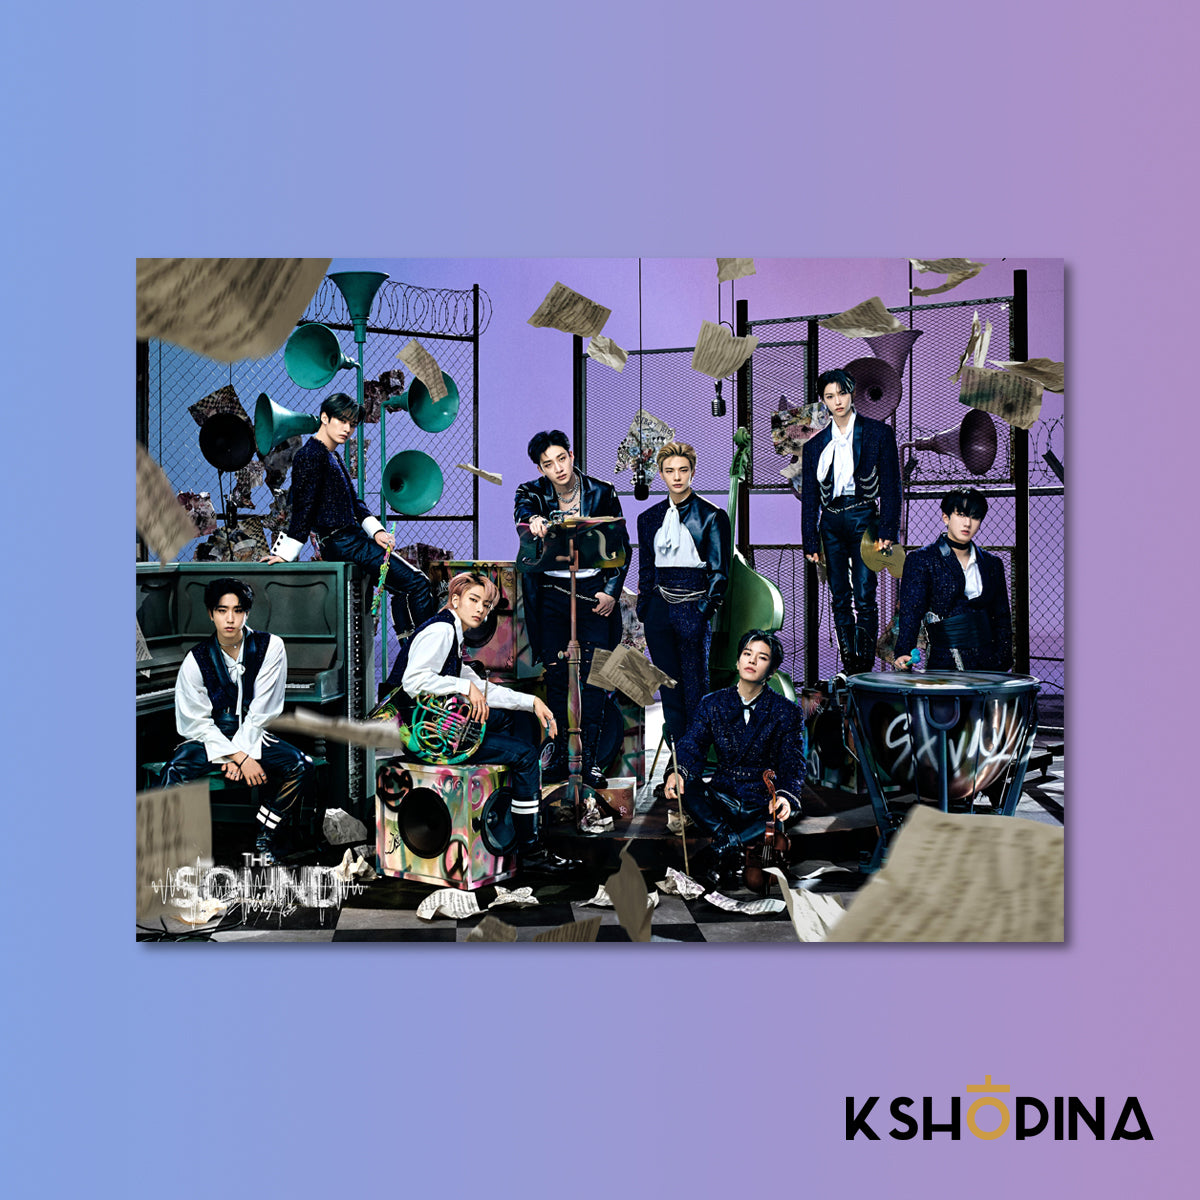 Updated SKZ album templates (added 5-Star and The Sound) : r